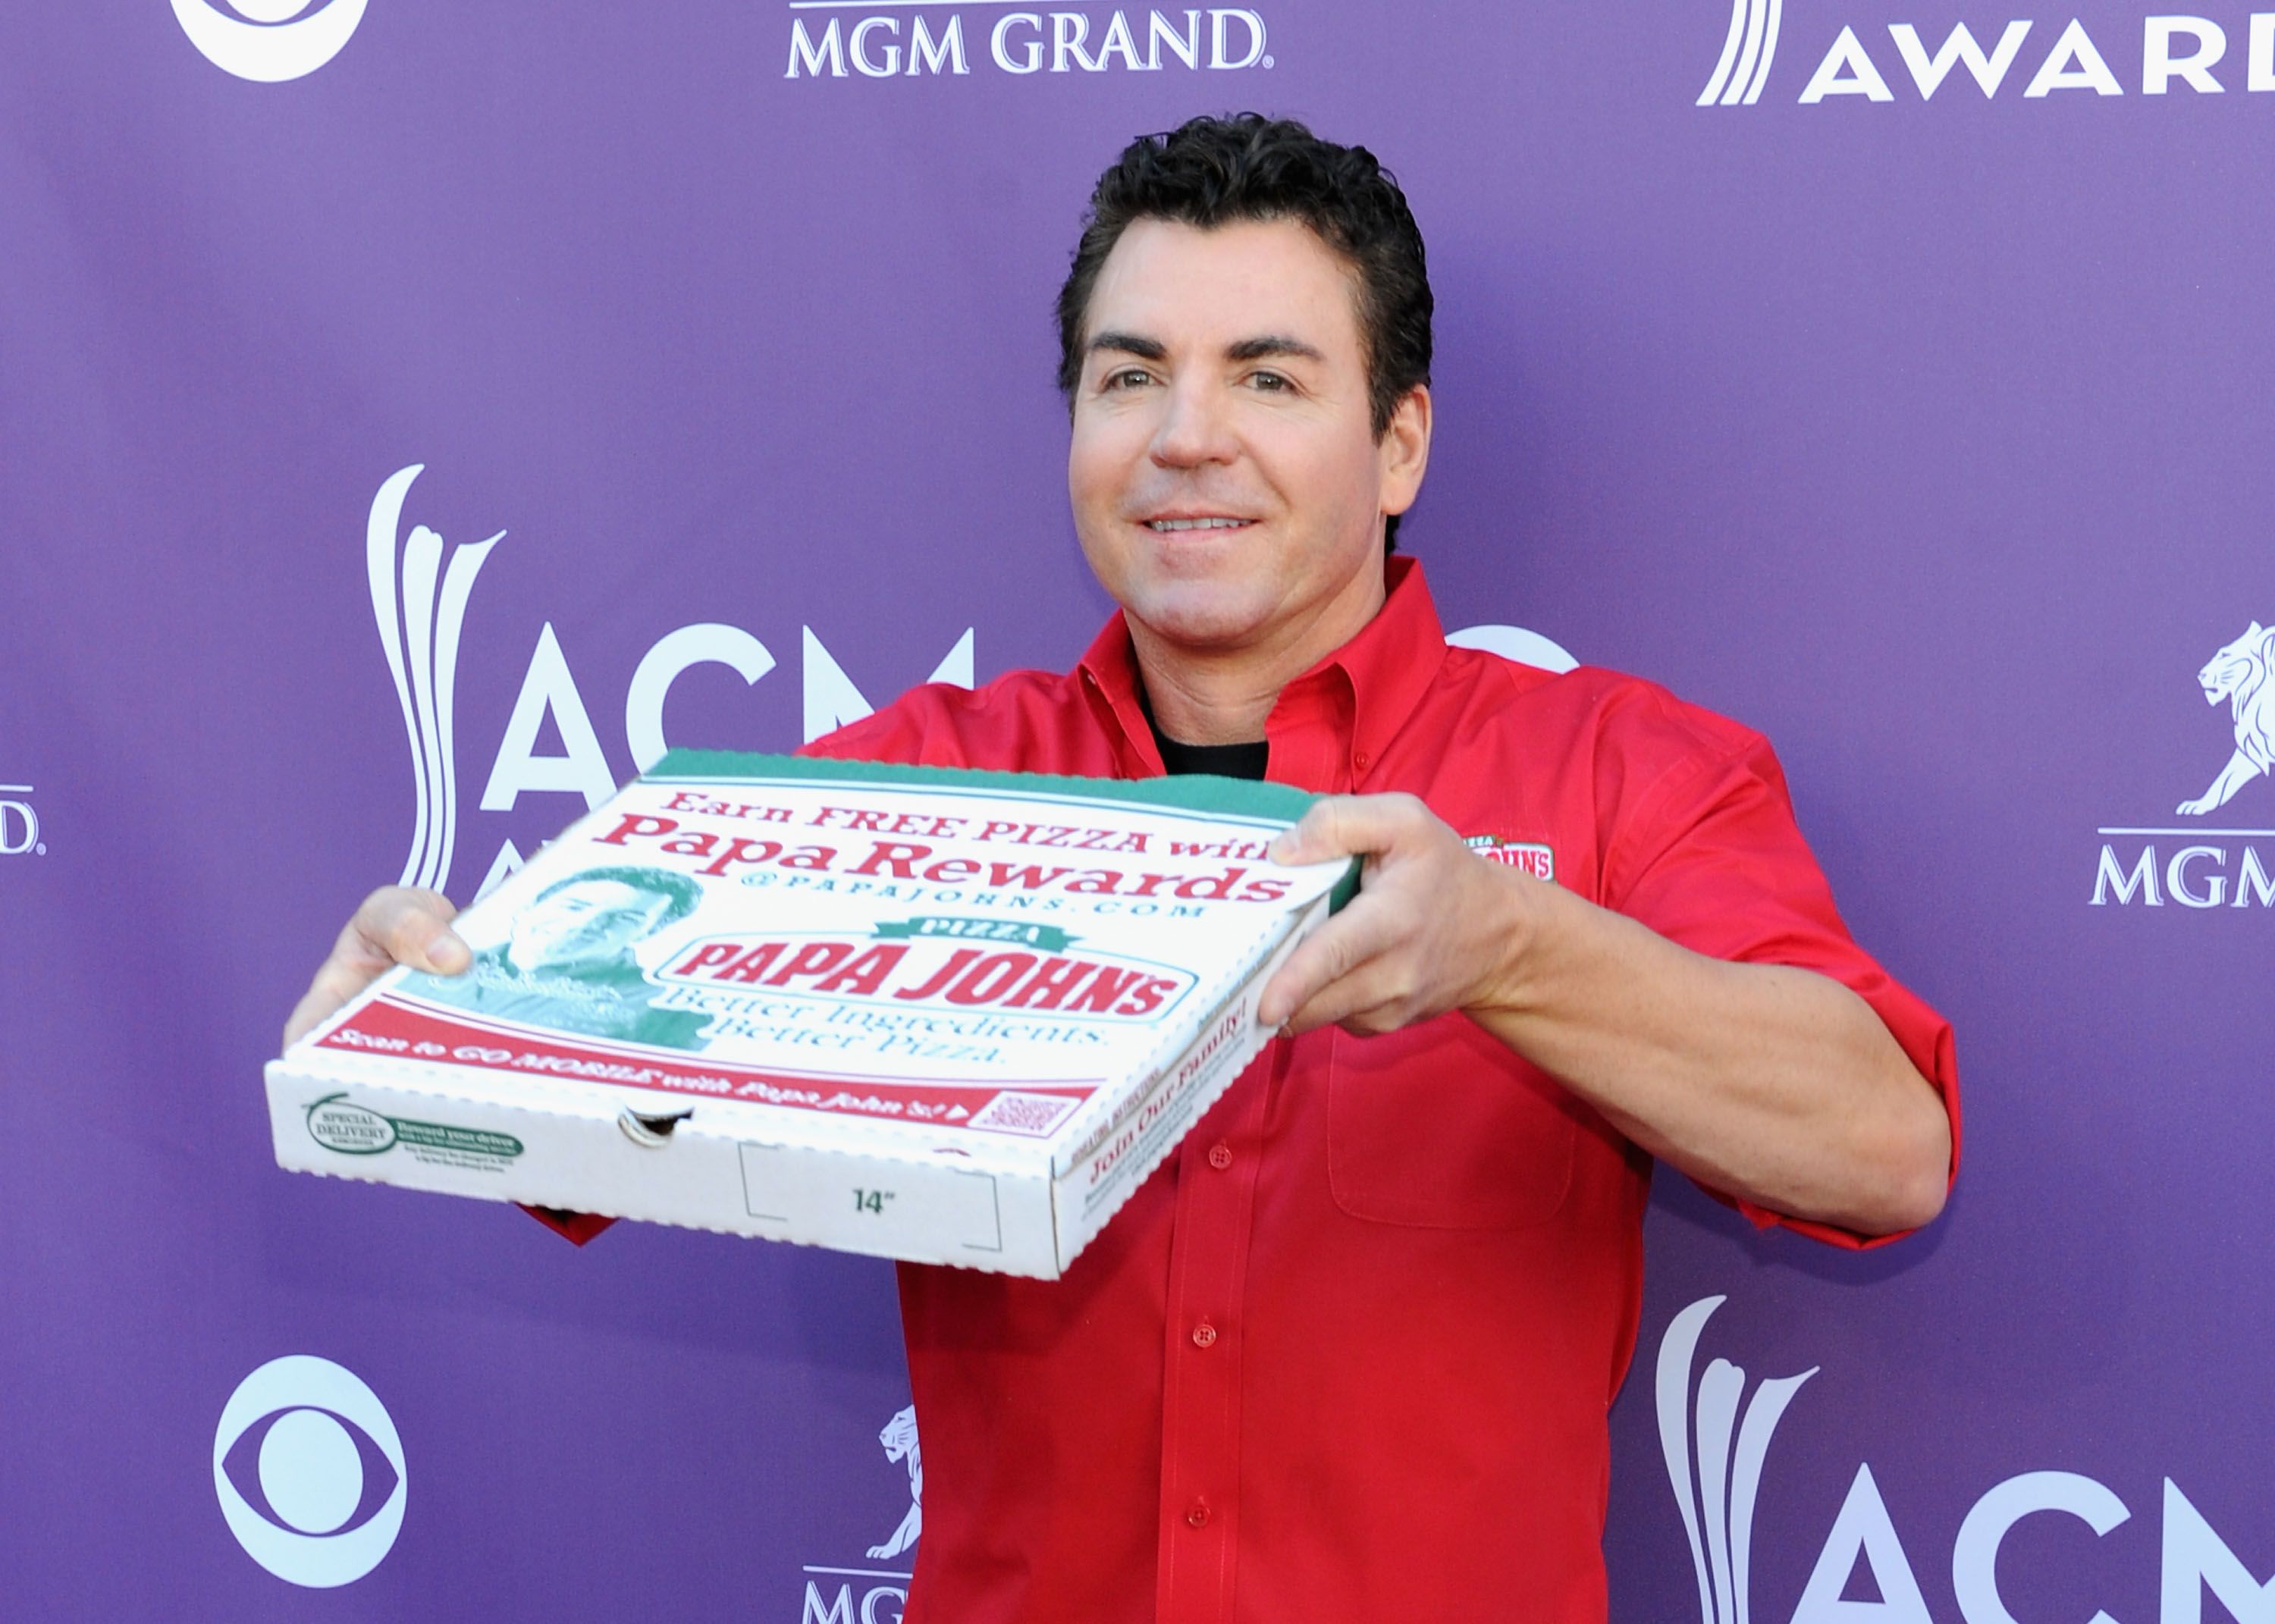 Papa John's founder John Schnatter is thinking about selling his stake